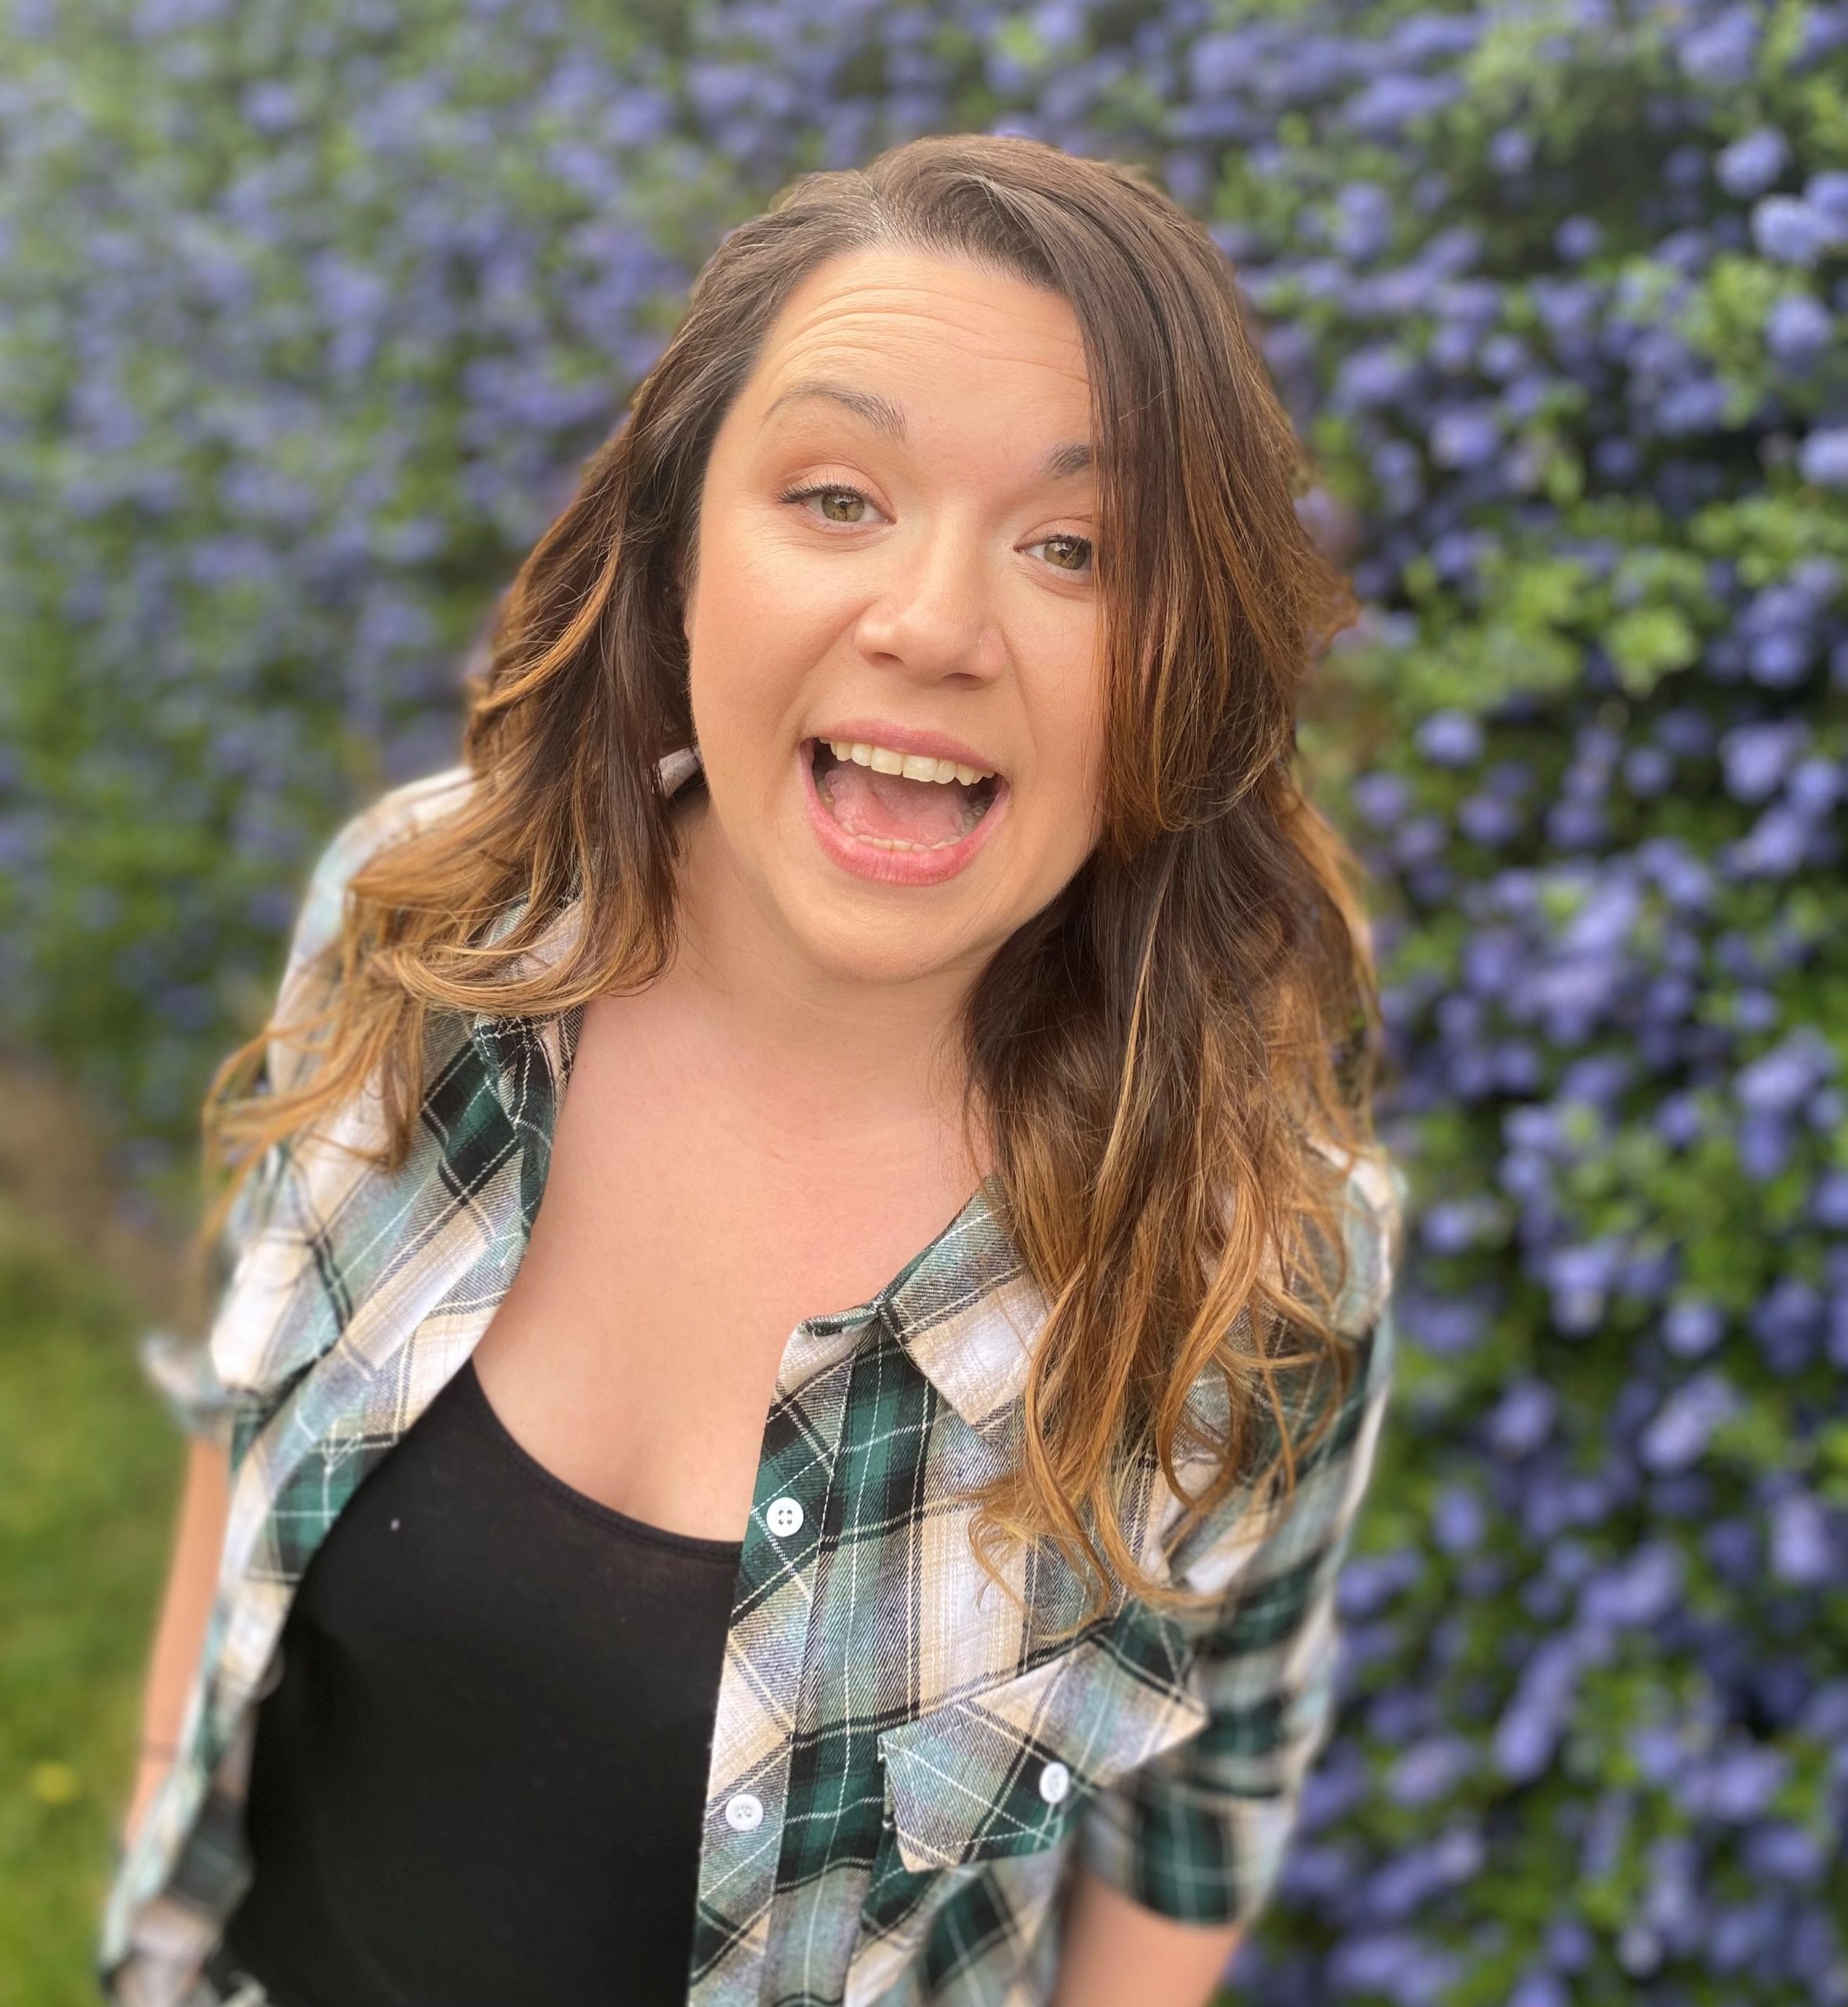 Lizzy, a white woman in her early thirties with long brown hair, smiles a very wide smile. She’s wearing a green check shirt open over a black vest, standing in front of a bush covered in blue flowers.